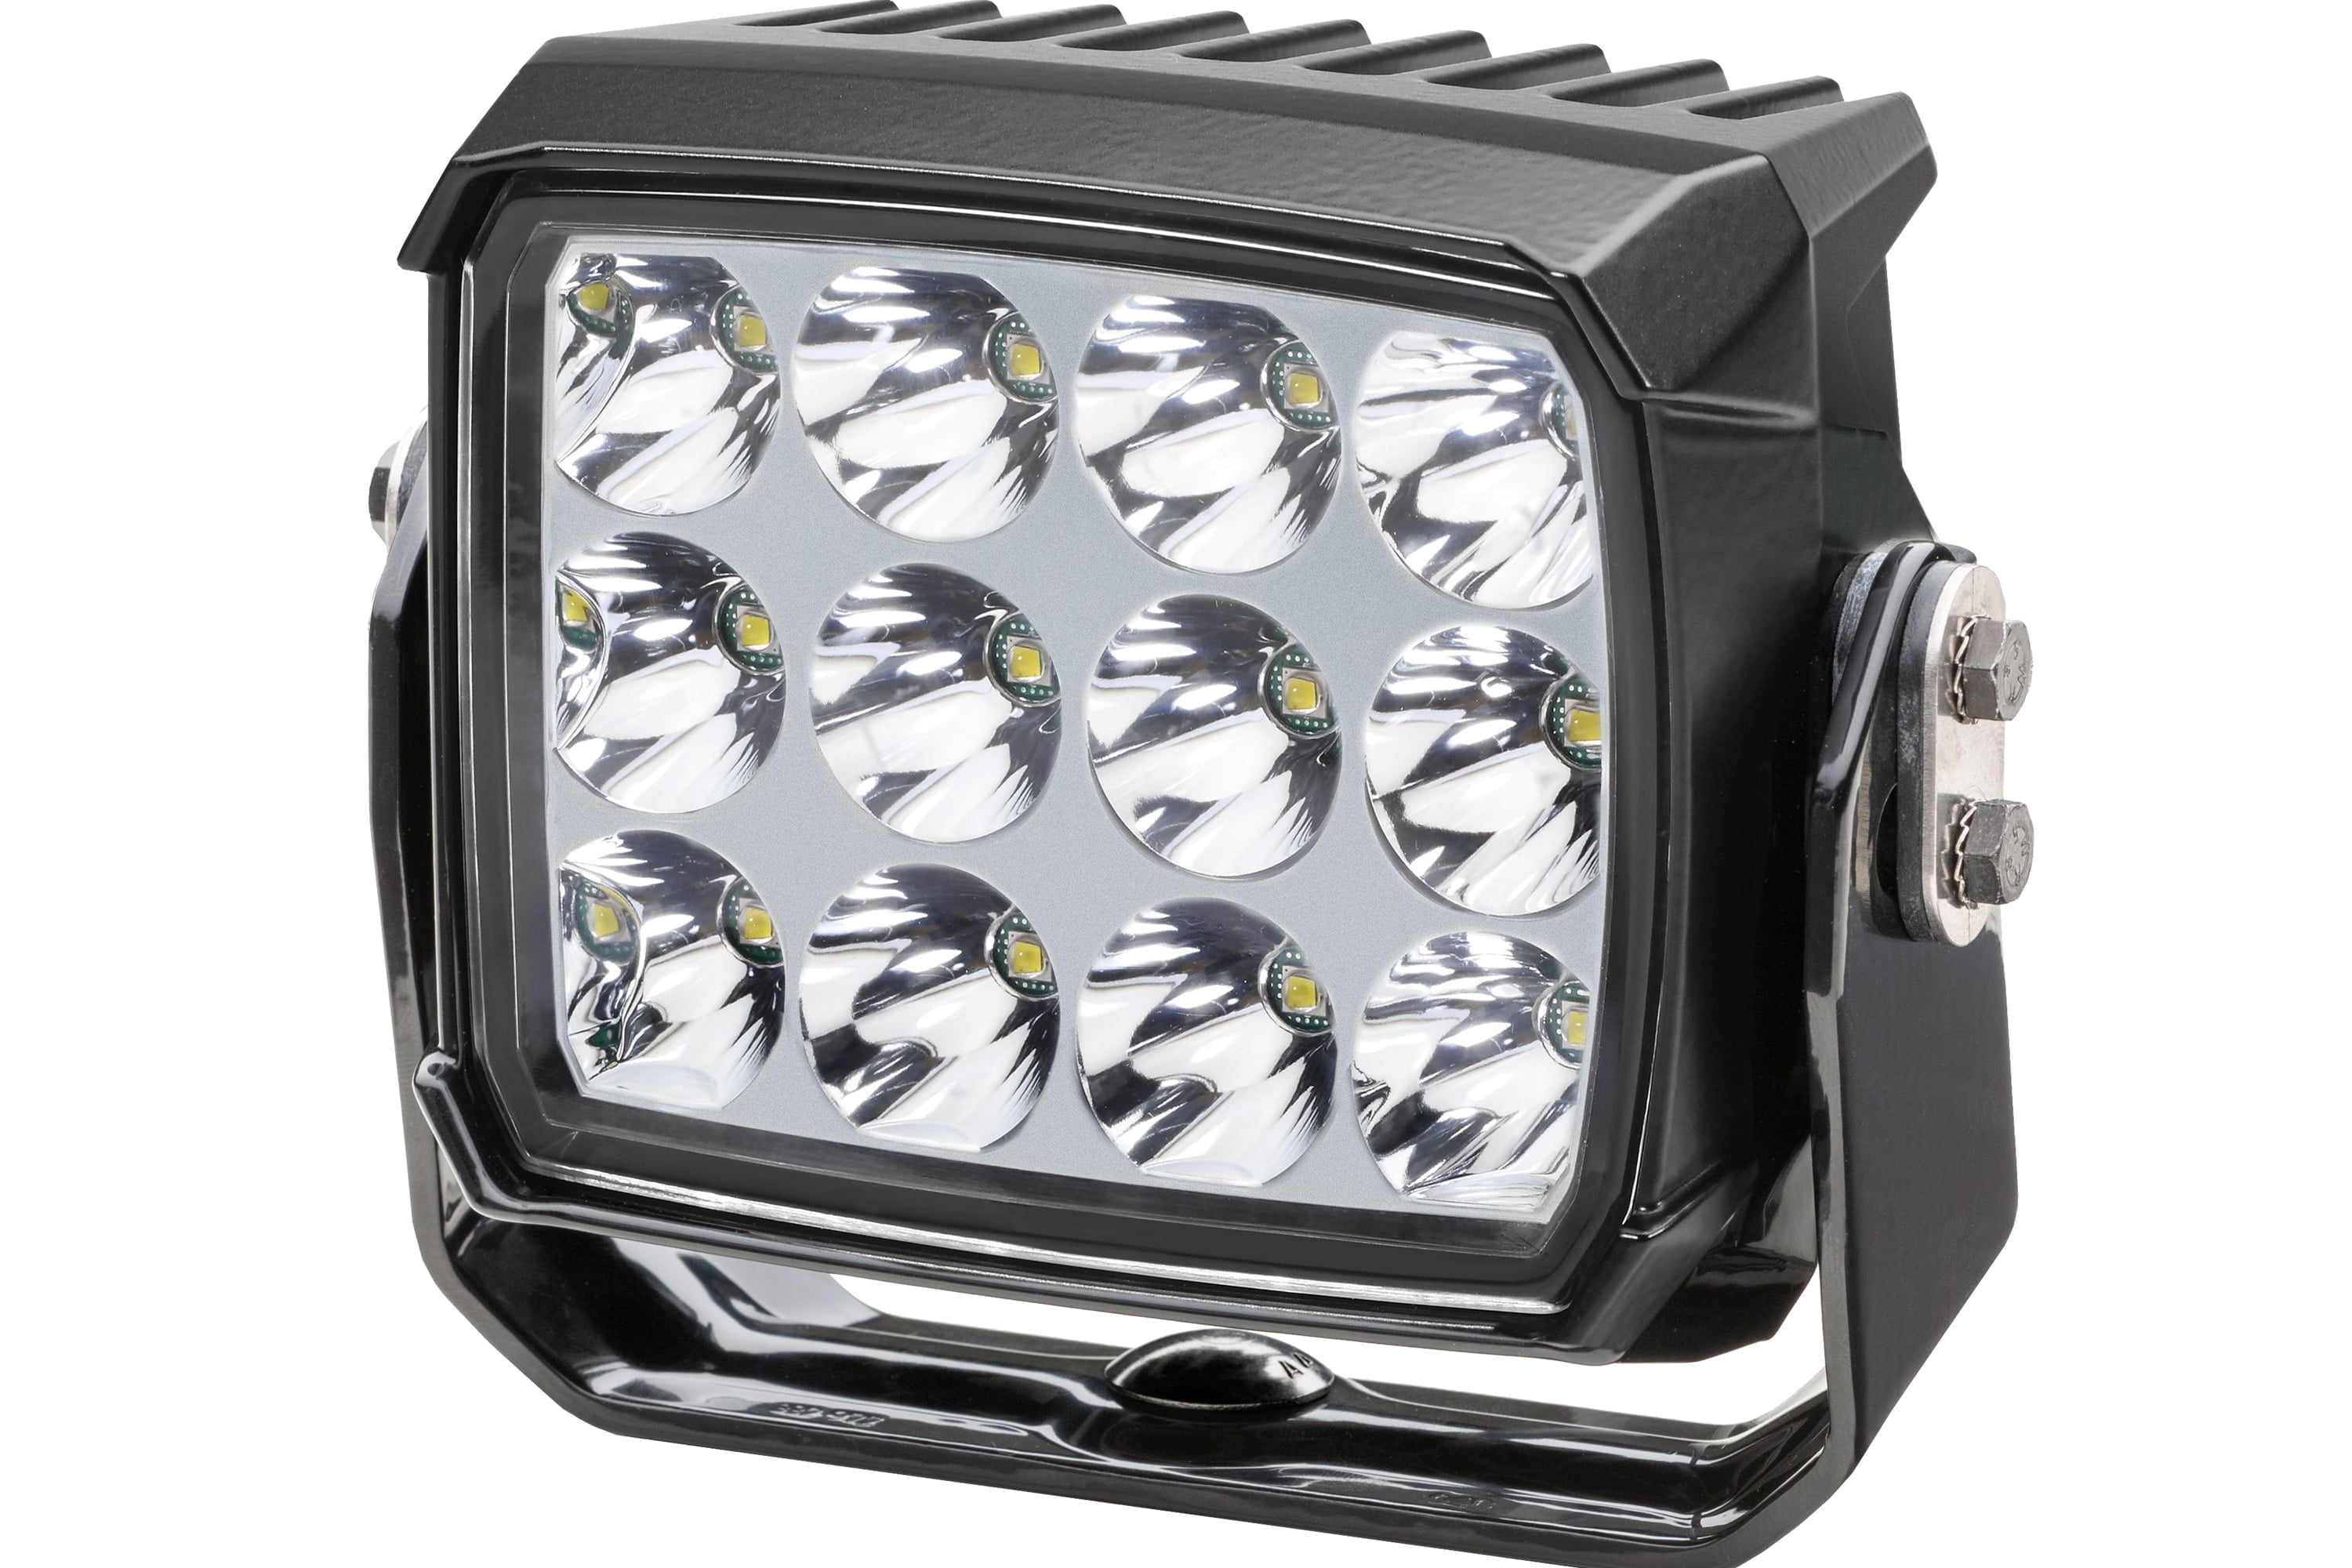 The HELLA RokLUME driving light features 12 high-powered LEDs and provides drivers with a high output forward beam, combined with a wide spread beam for edge of road illumination.